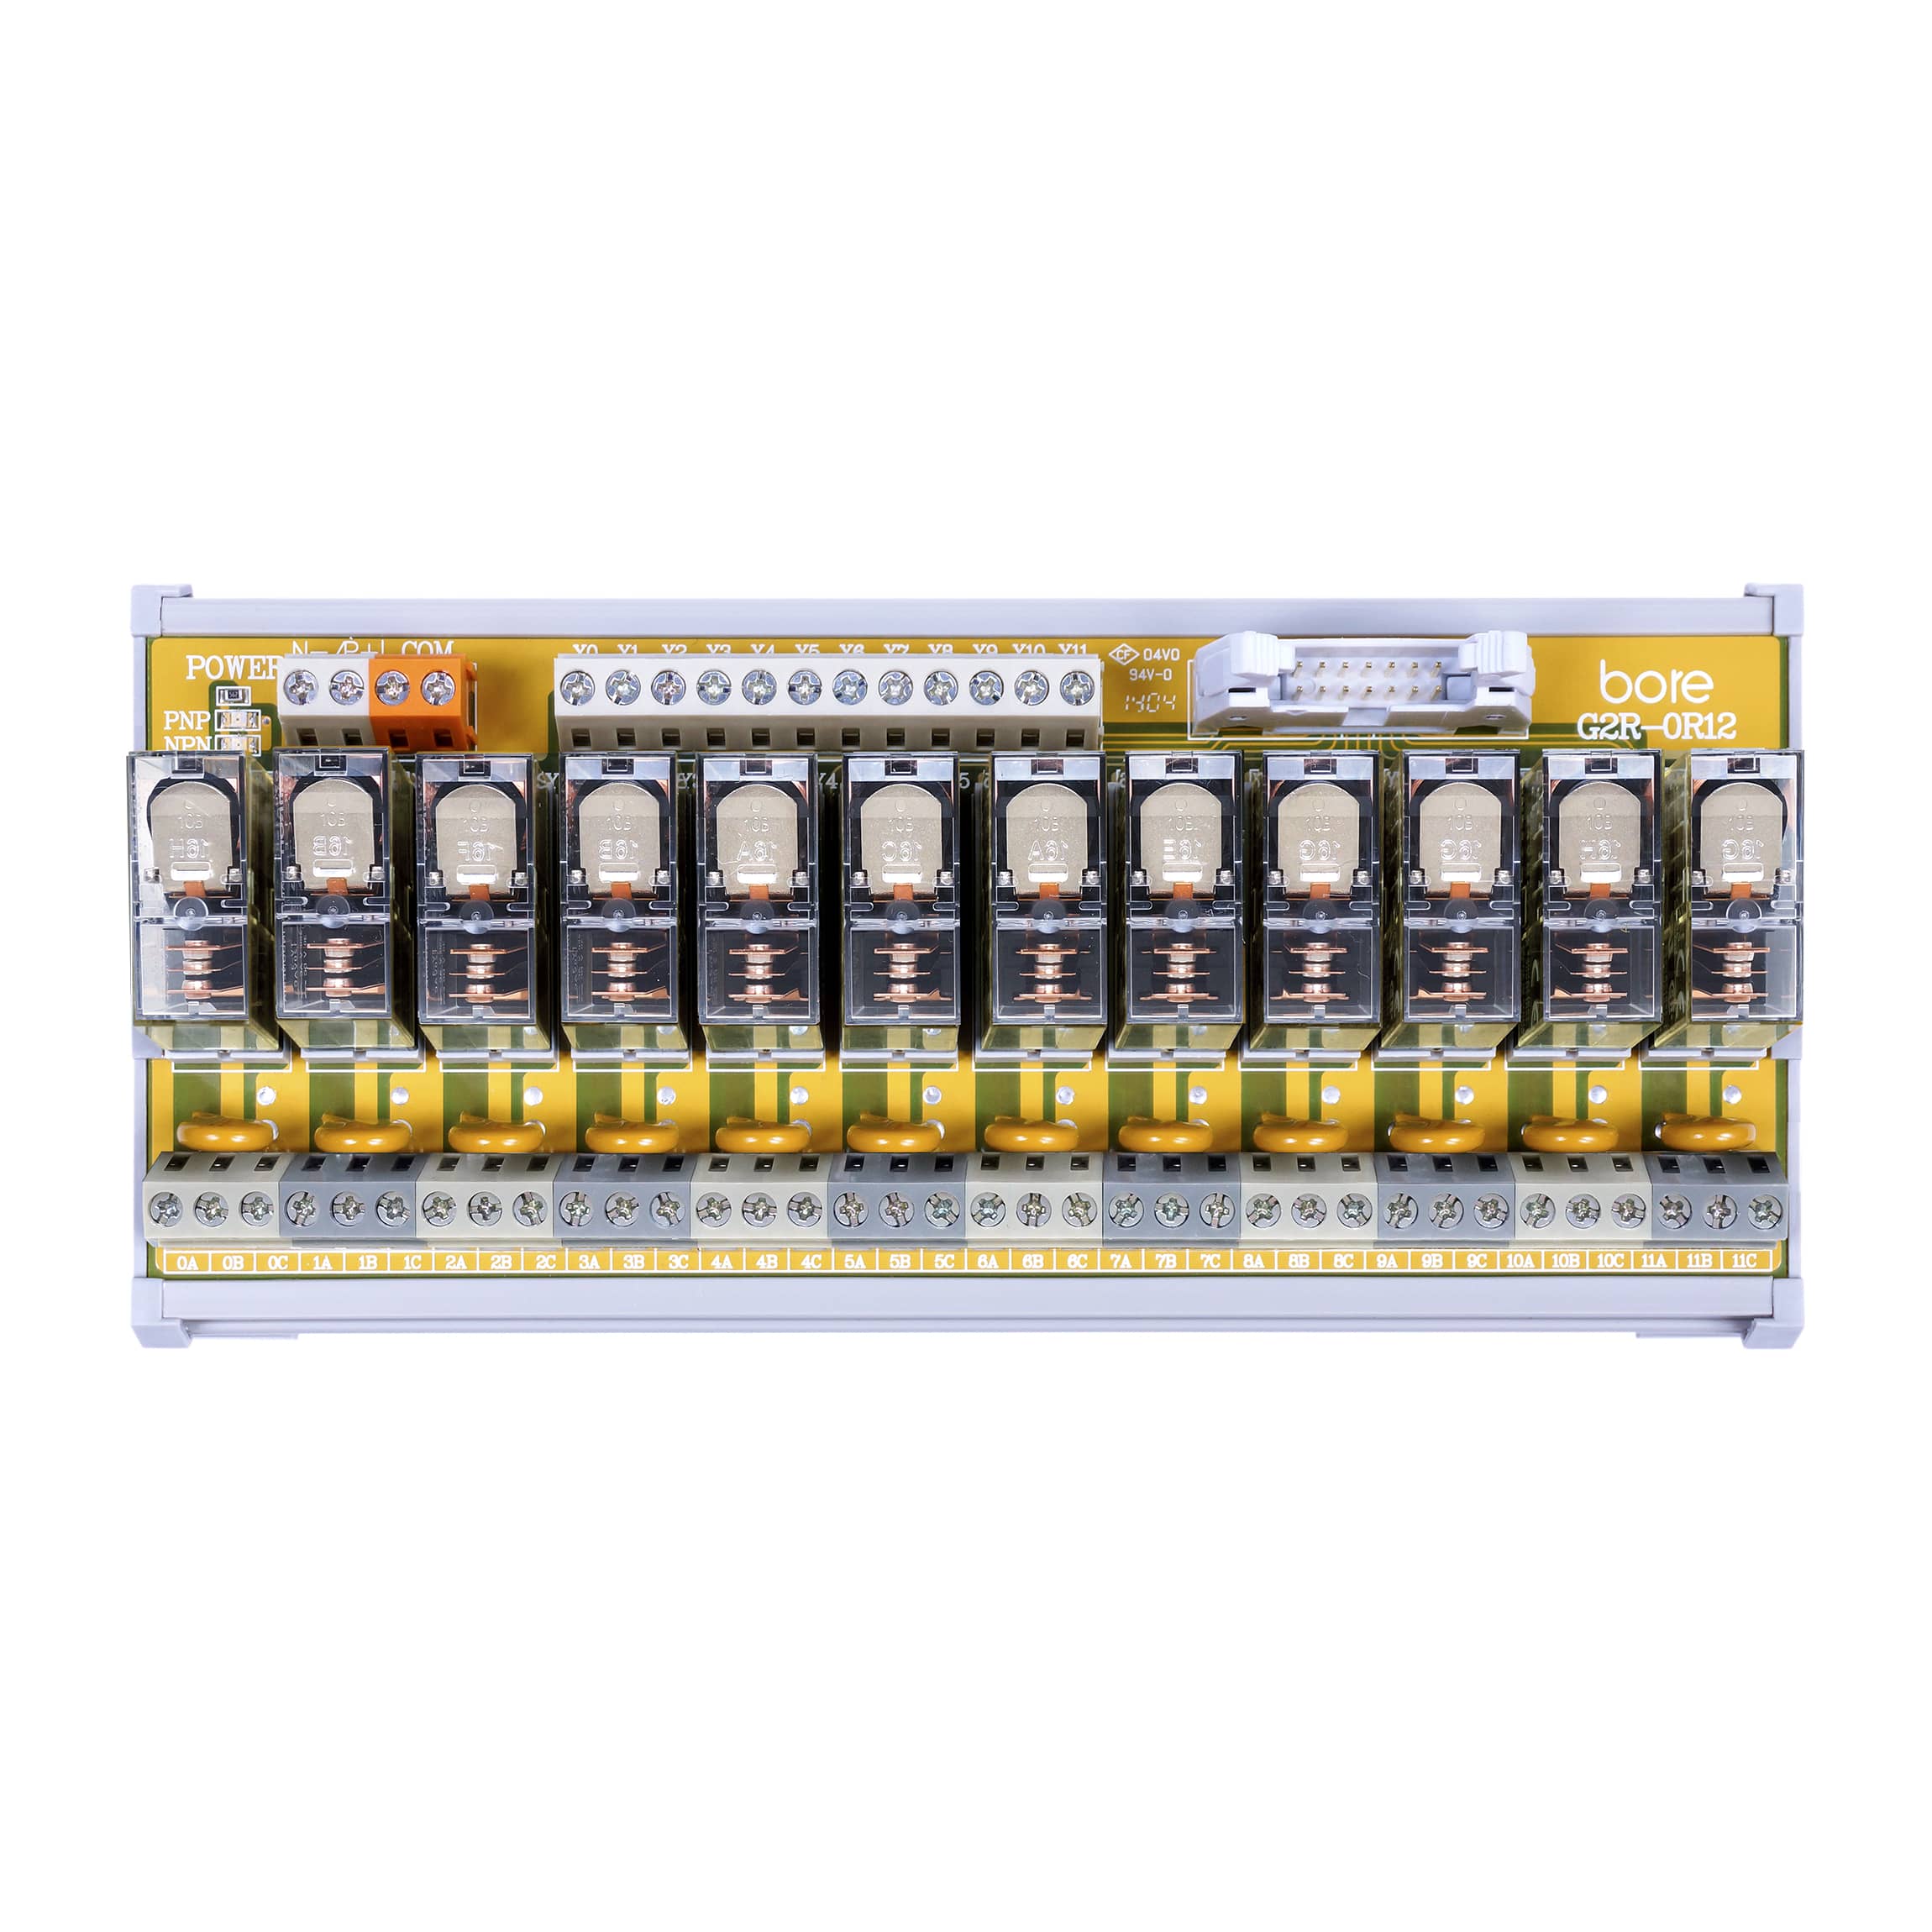 Products|Relay Module G2R-OR12-SP